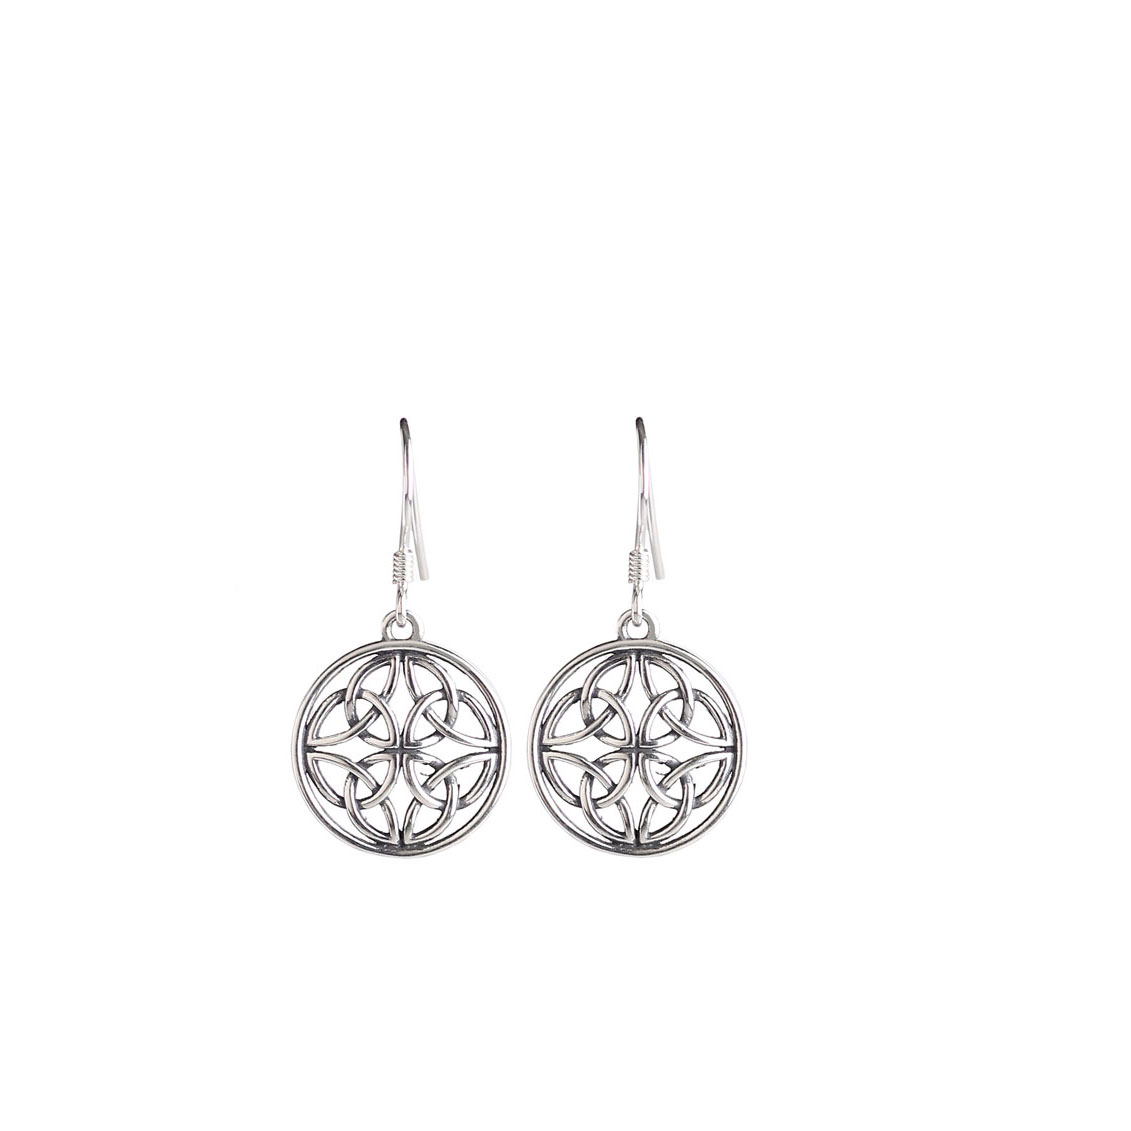 Cashs Ireland, Sterling Silver Celtic Trinity Knot Round French Hook Earrings, Pair